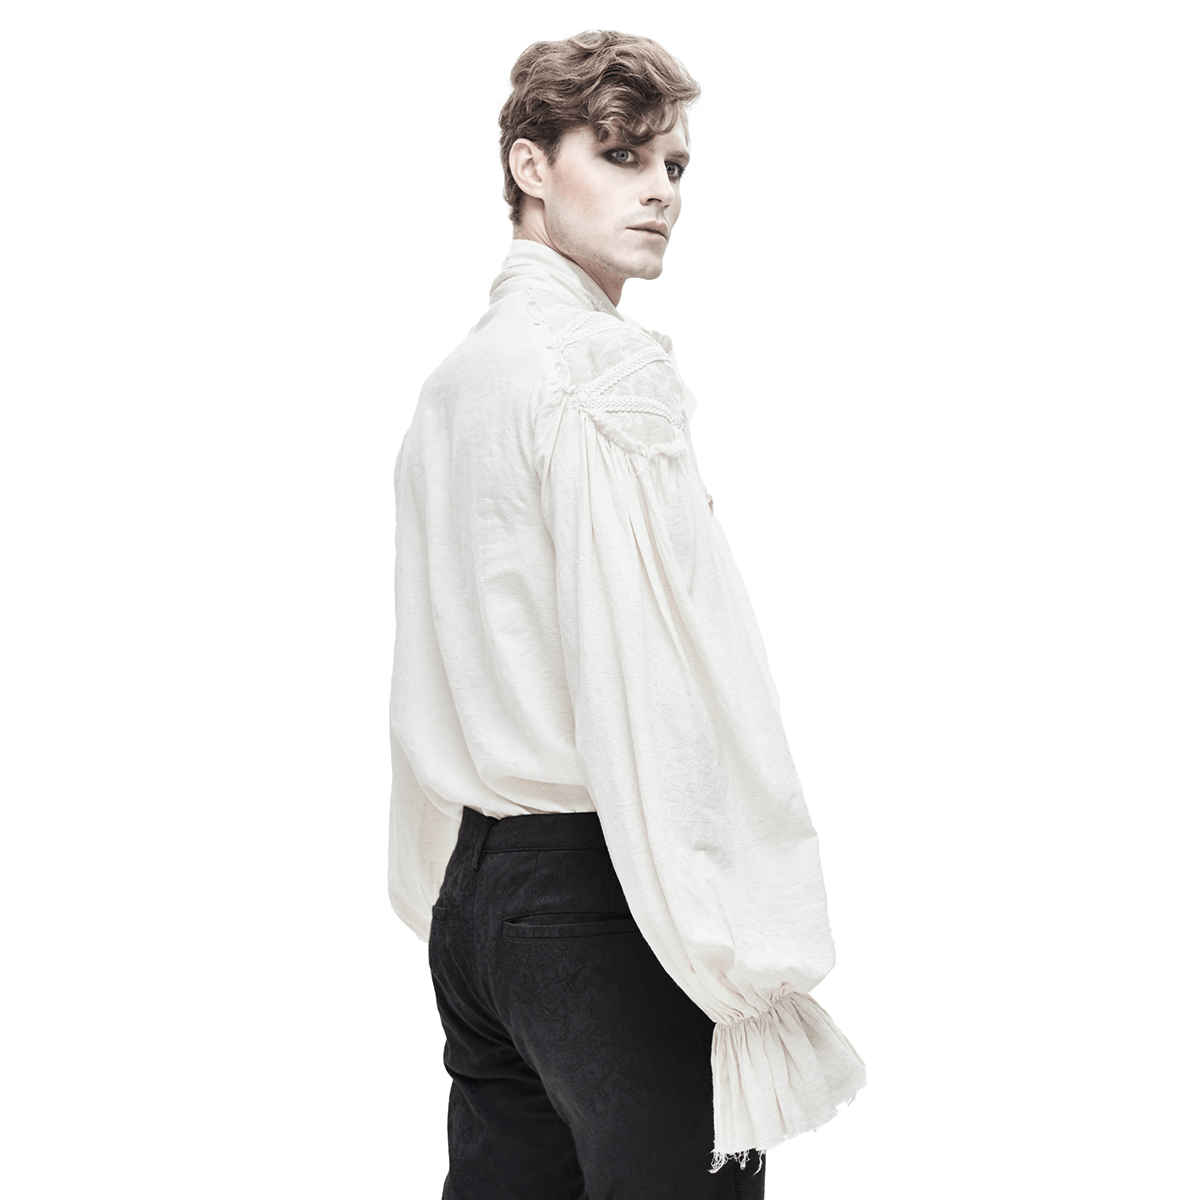 Vintage White Long Sleeves Shirt with Buttons in Front / Gothic Style Men's Shirt with Flared Cuffs - HARD'N'HEAVY